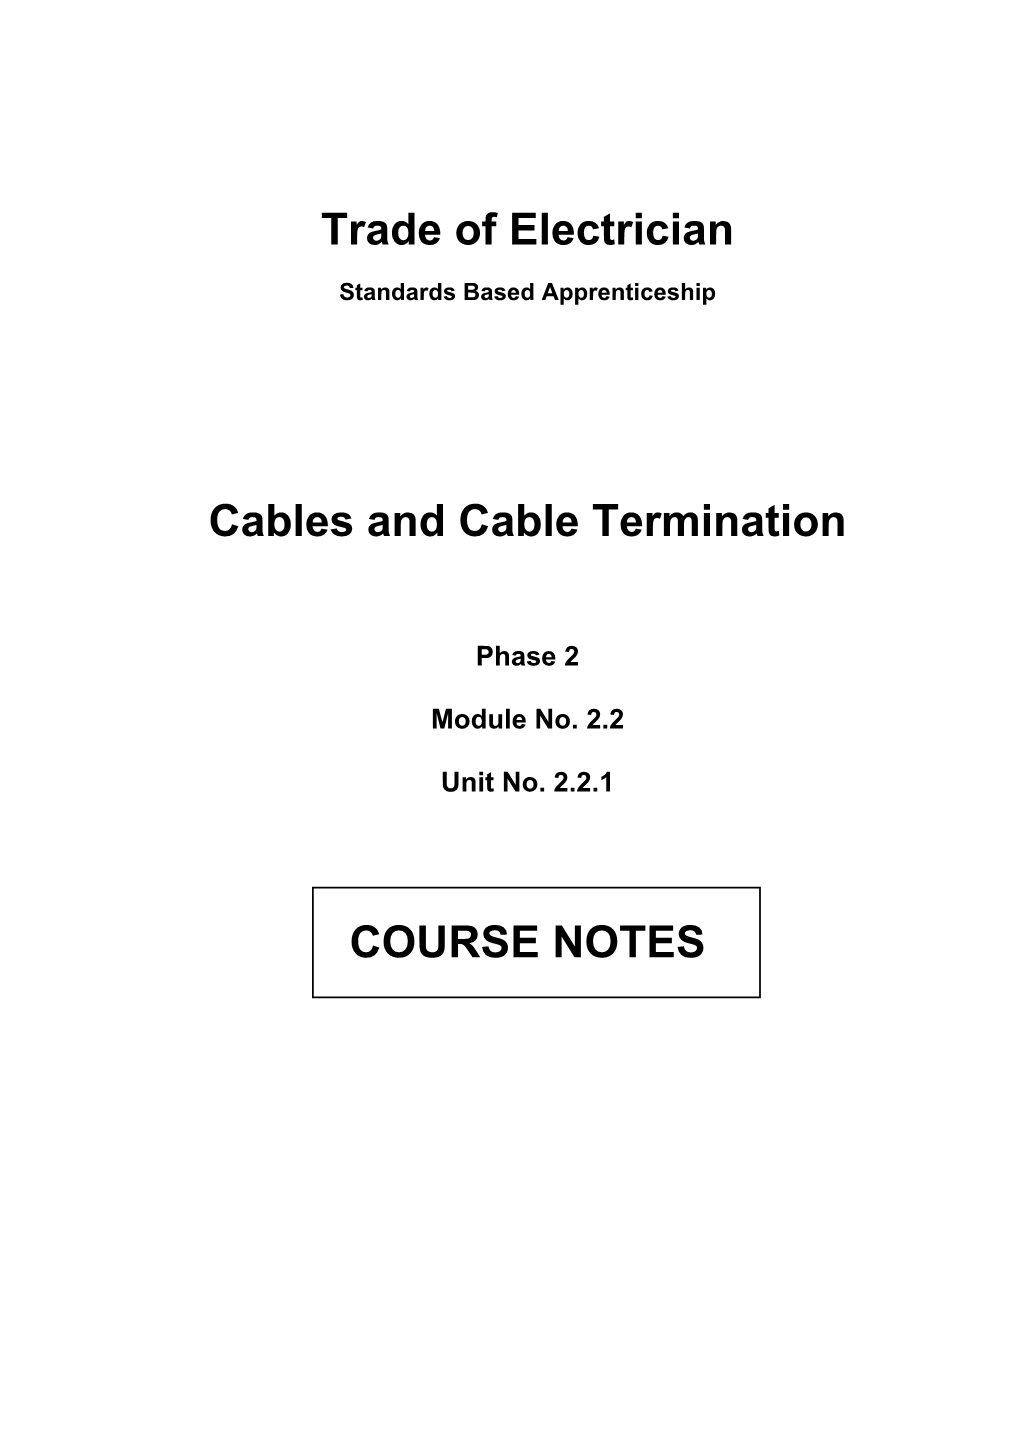 Cables and Cable Termination